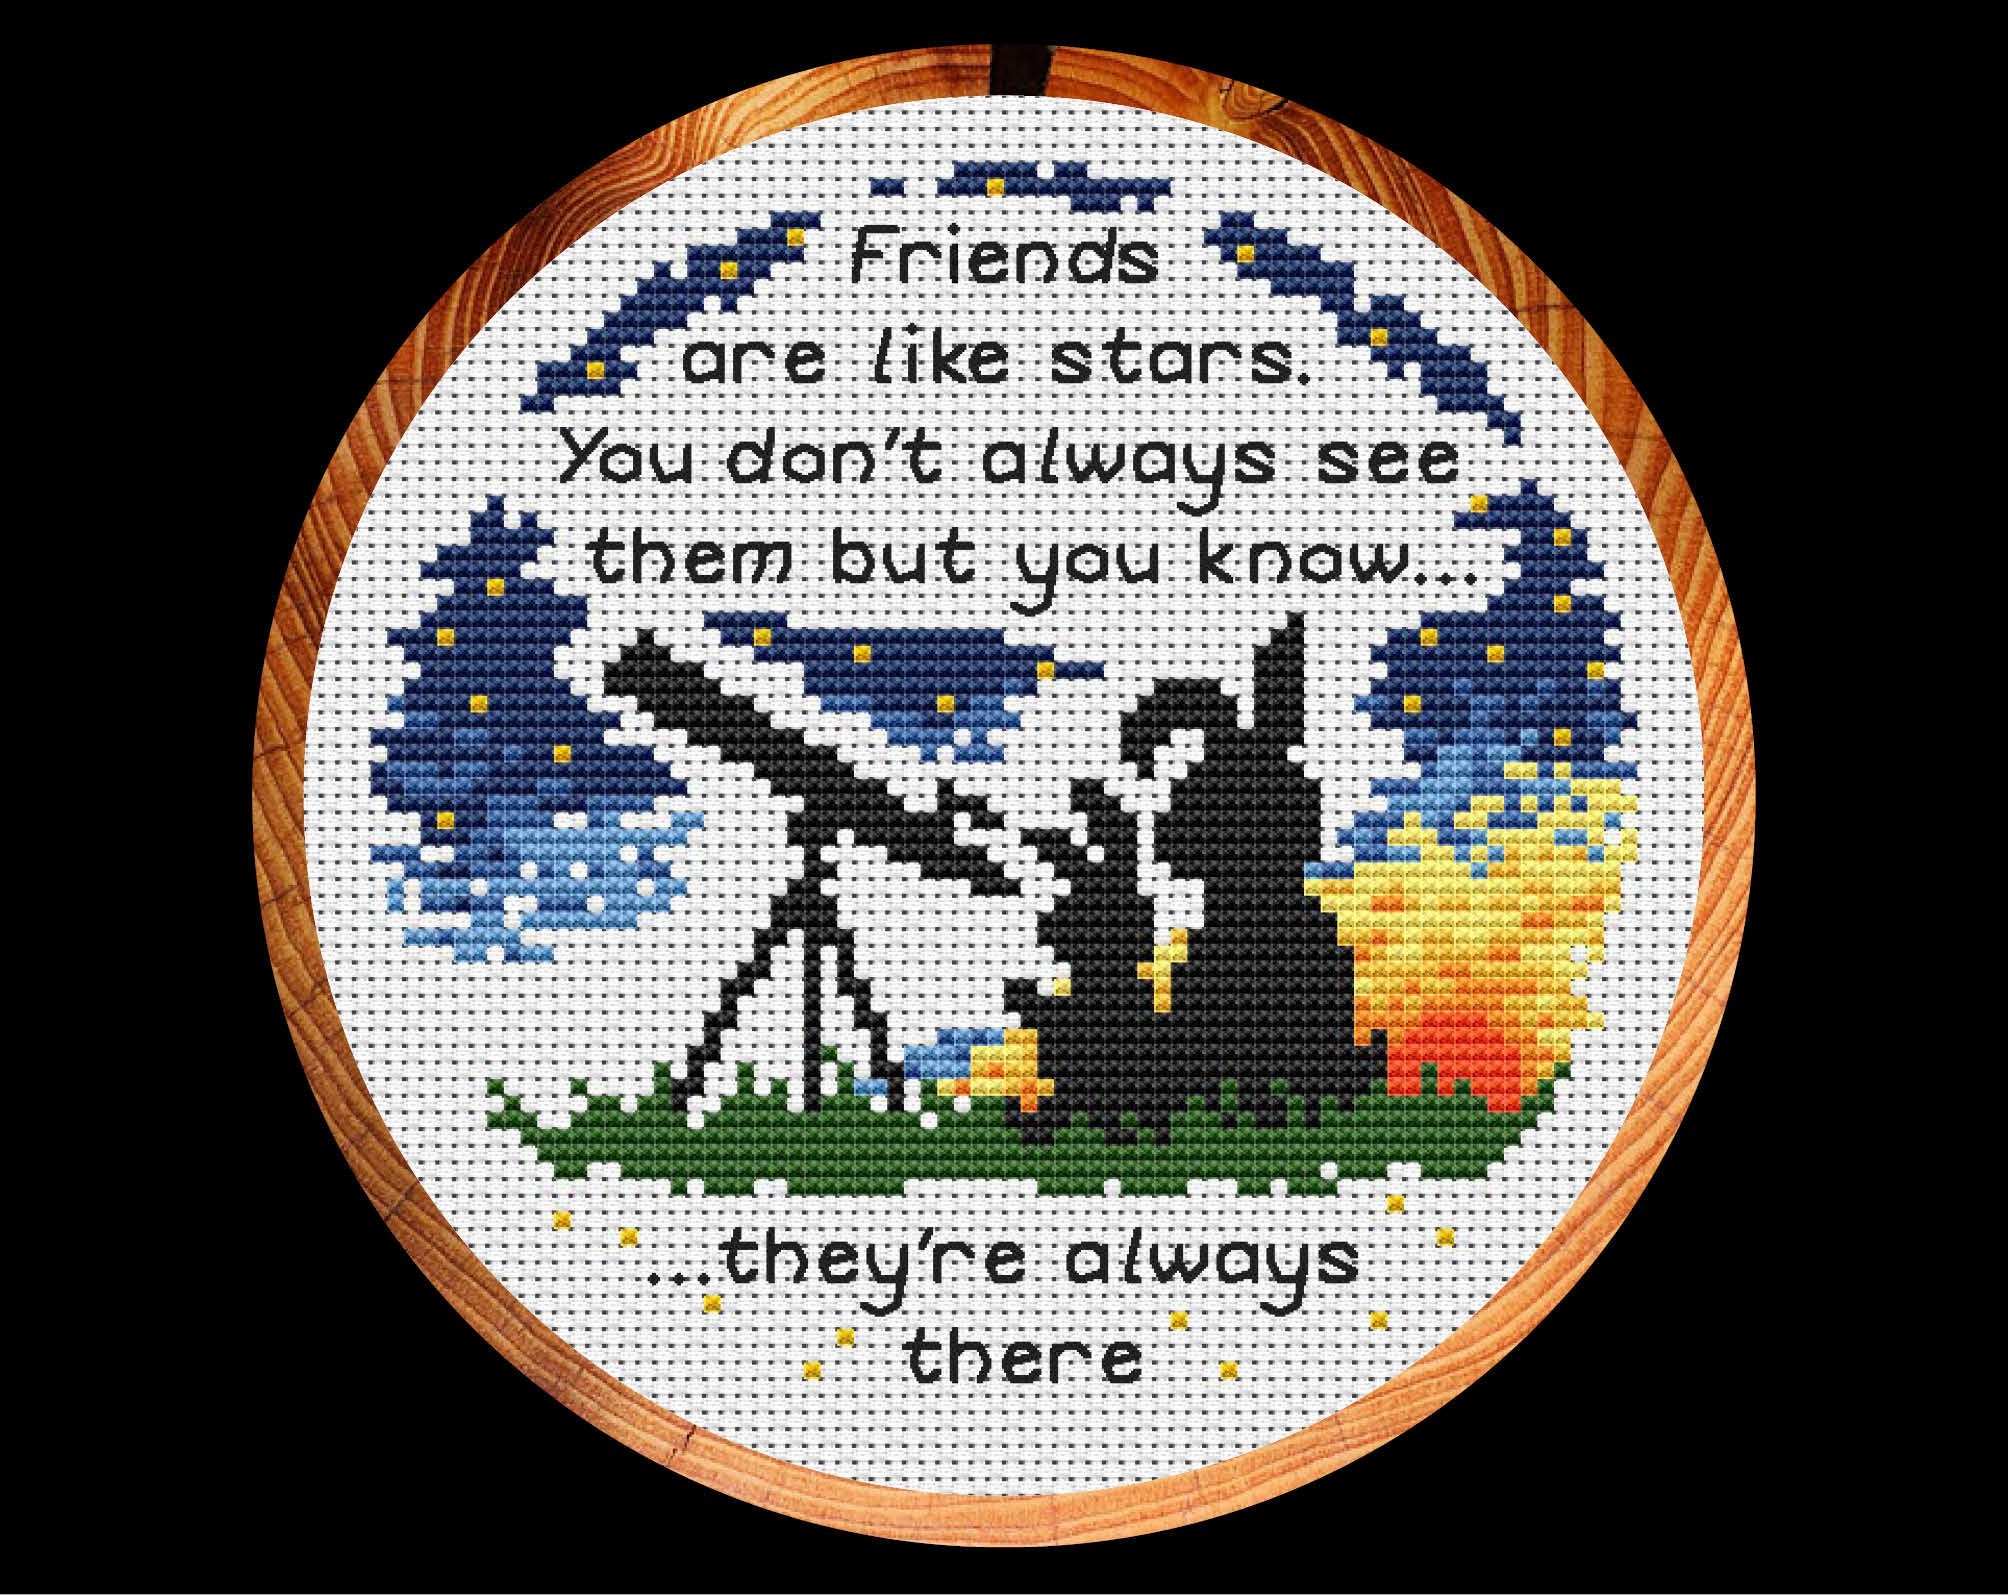 Cross stitch pattern of two bunnies looking through a telescope, with the words 'Friends are like stars. You don't always see them but you know they're always there." Shown in hoop.